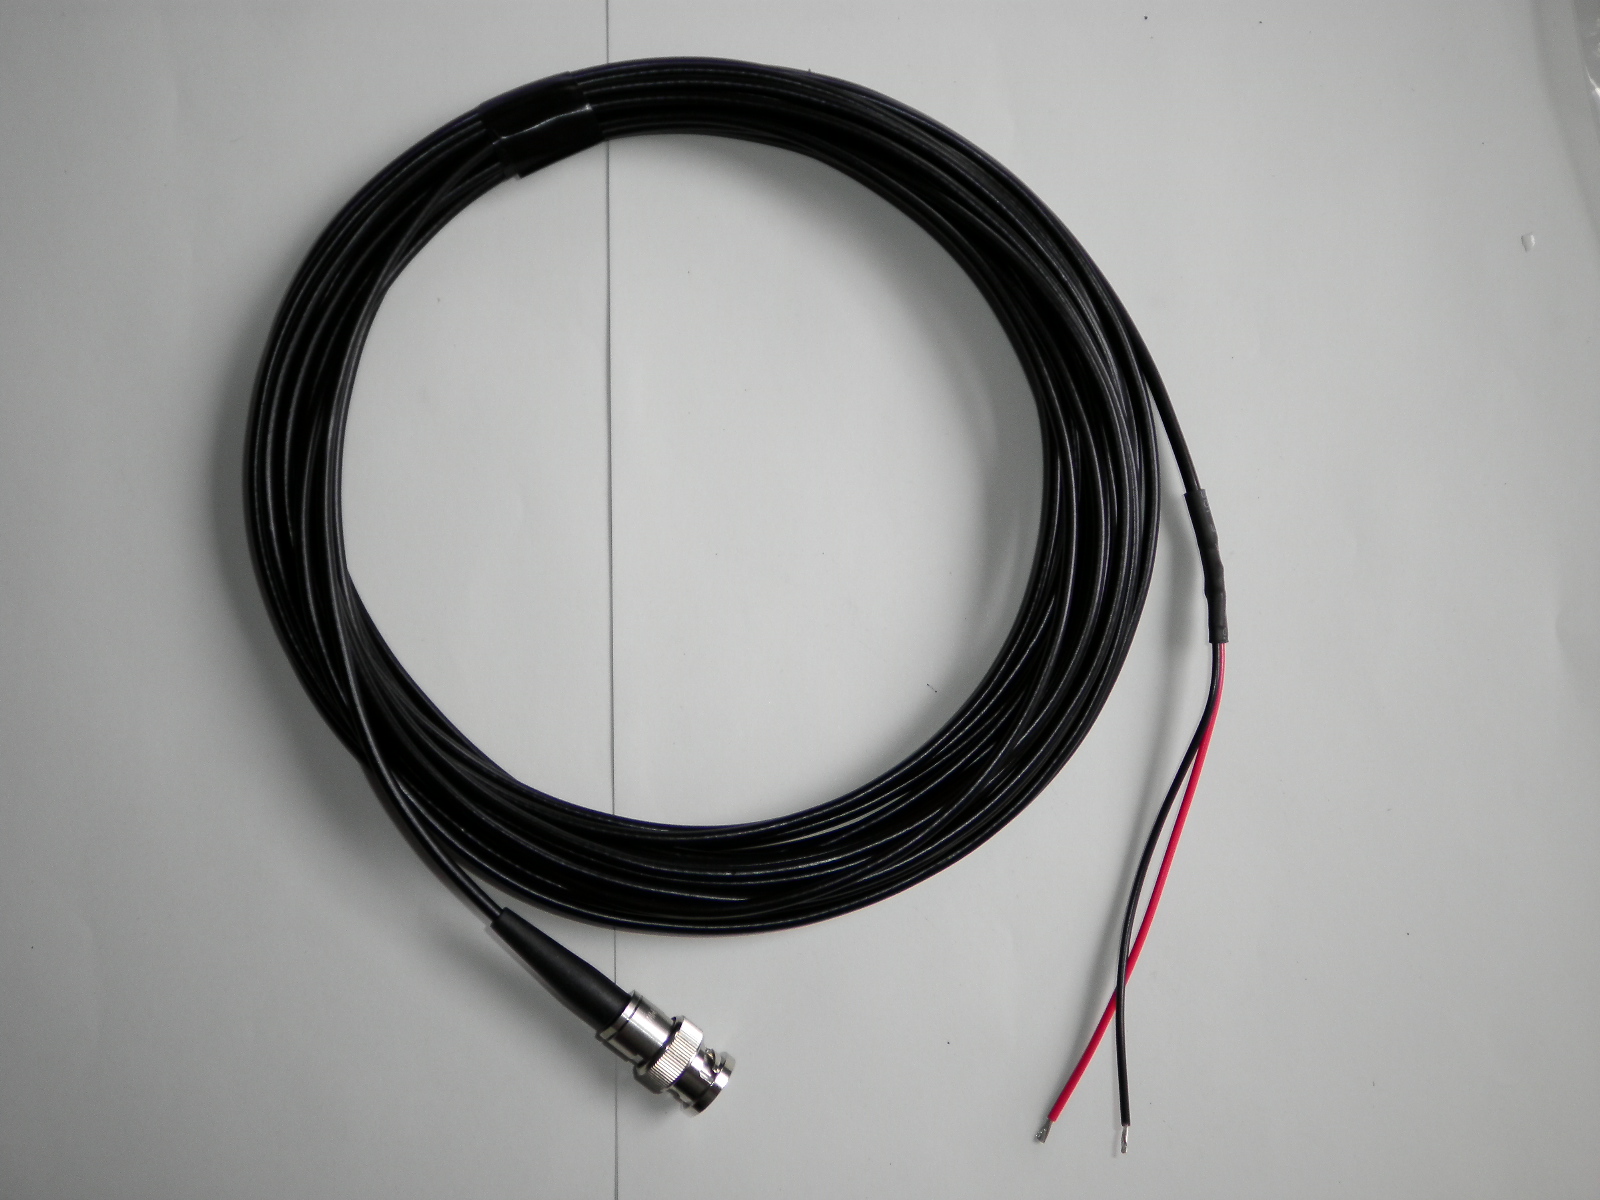 http://www.cable-harness-ex.com/case/SANY0021.JPG